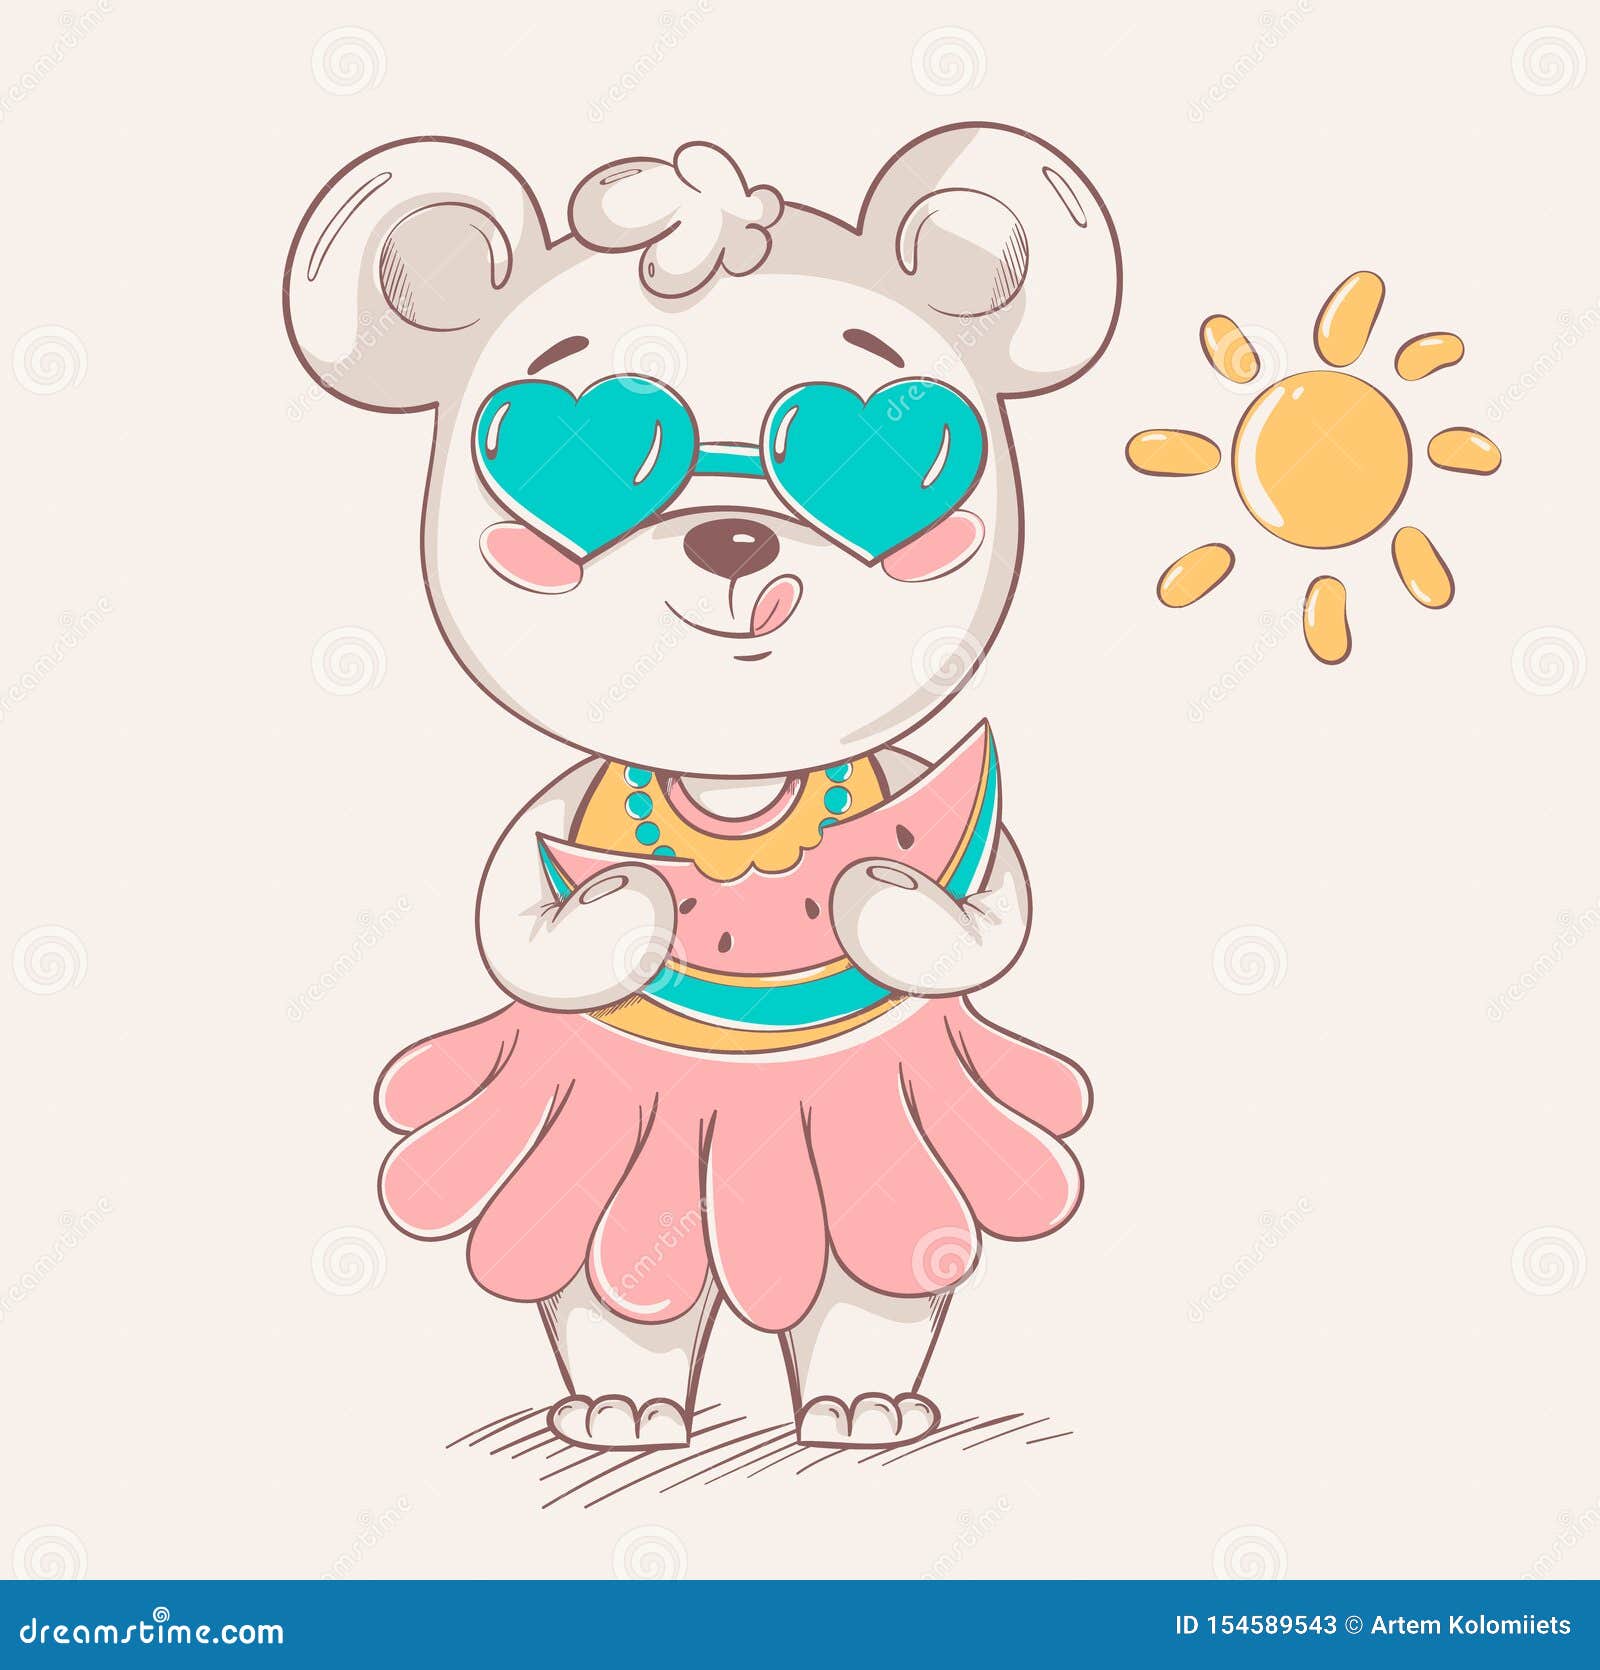 Download Cute Little Bear In Colorful Skirt And Sunglasses Stock ...